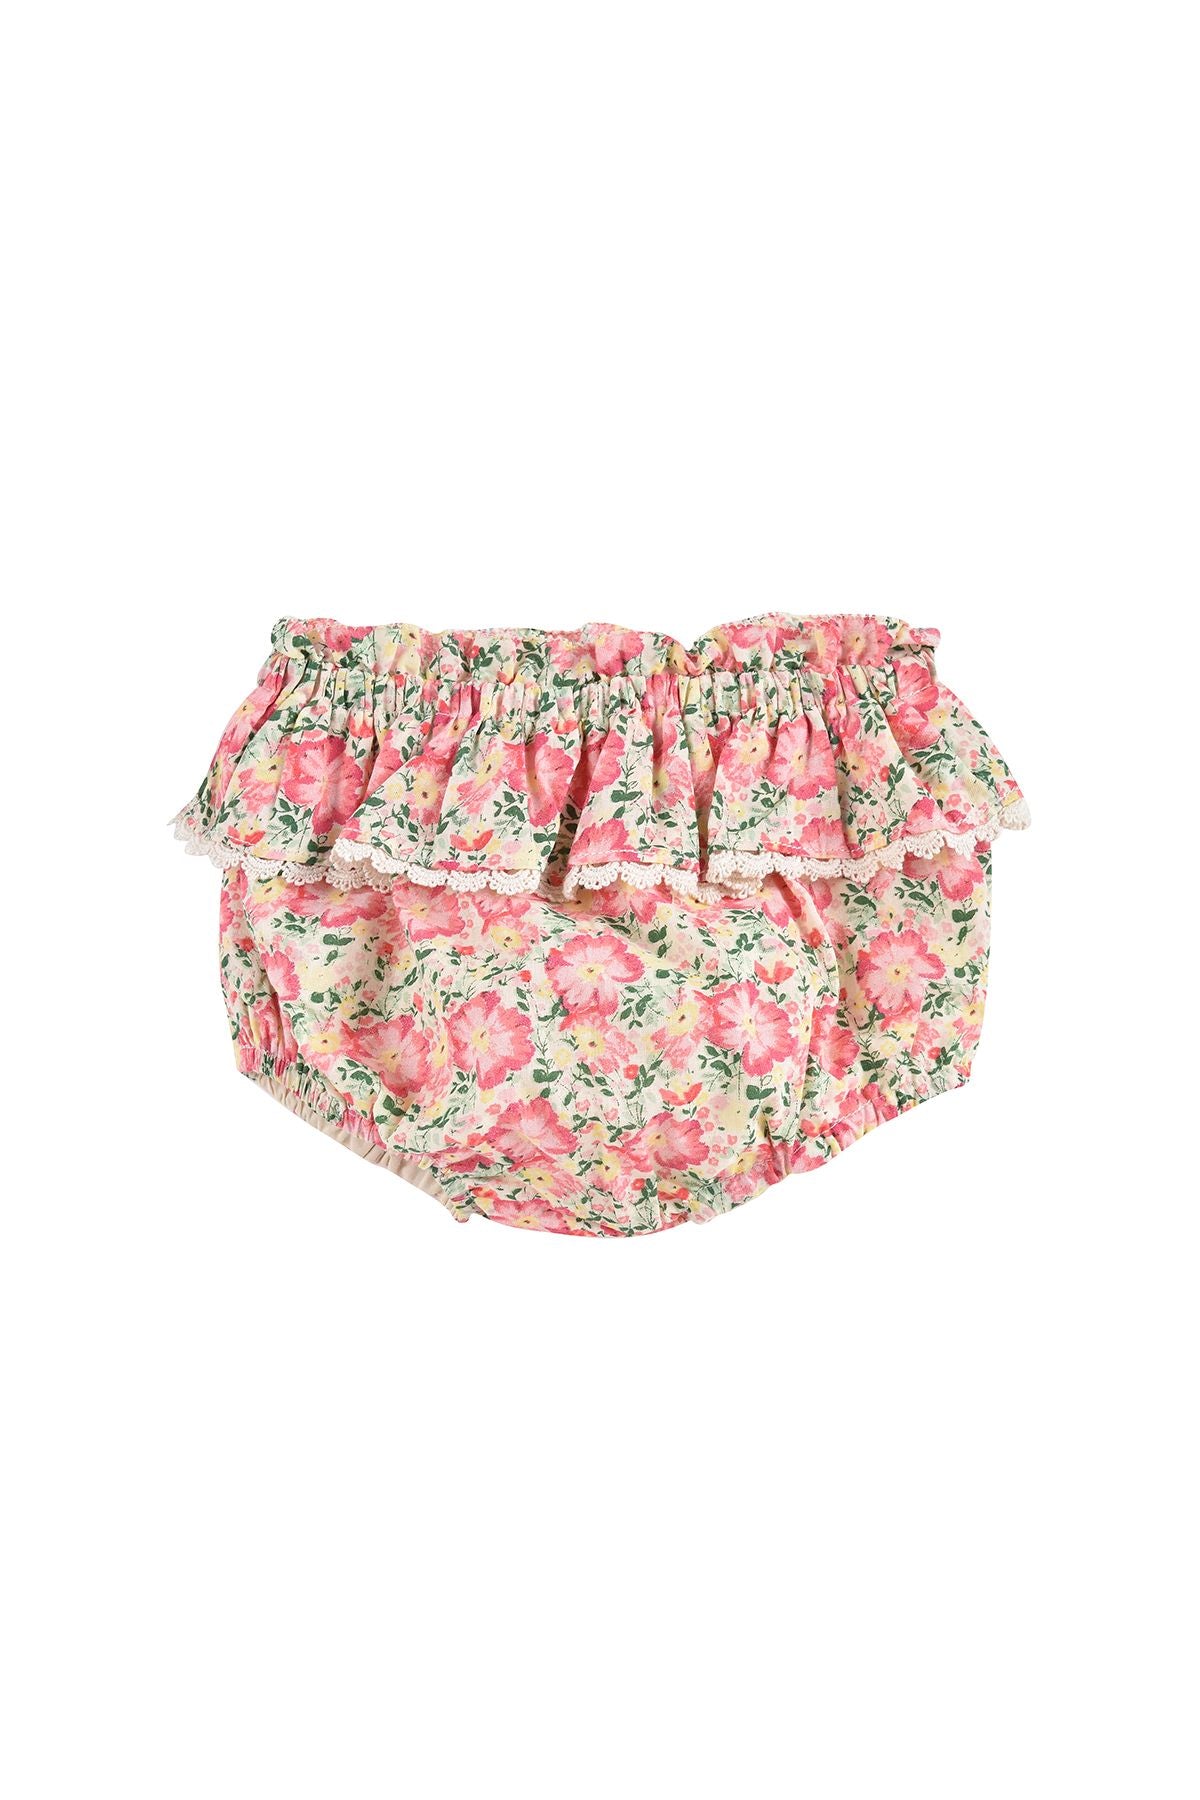 LOUISE MISHA CALAKMUL INFANT BLOOMERS - PINK MEADOW